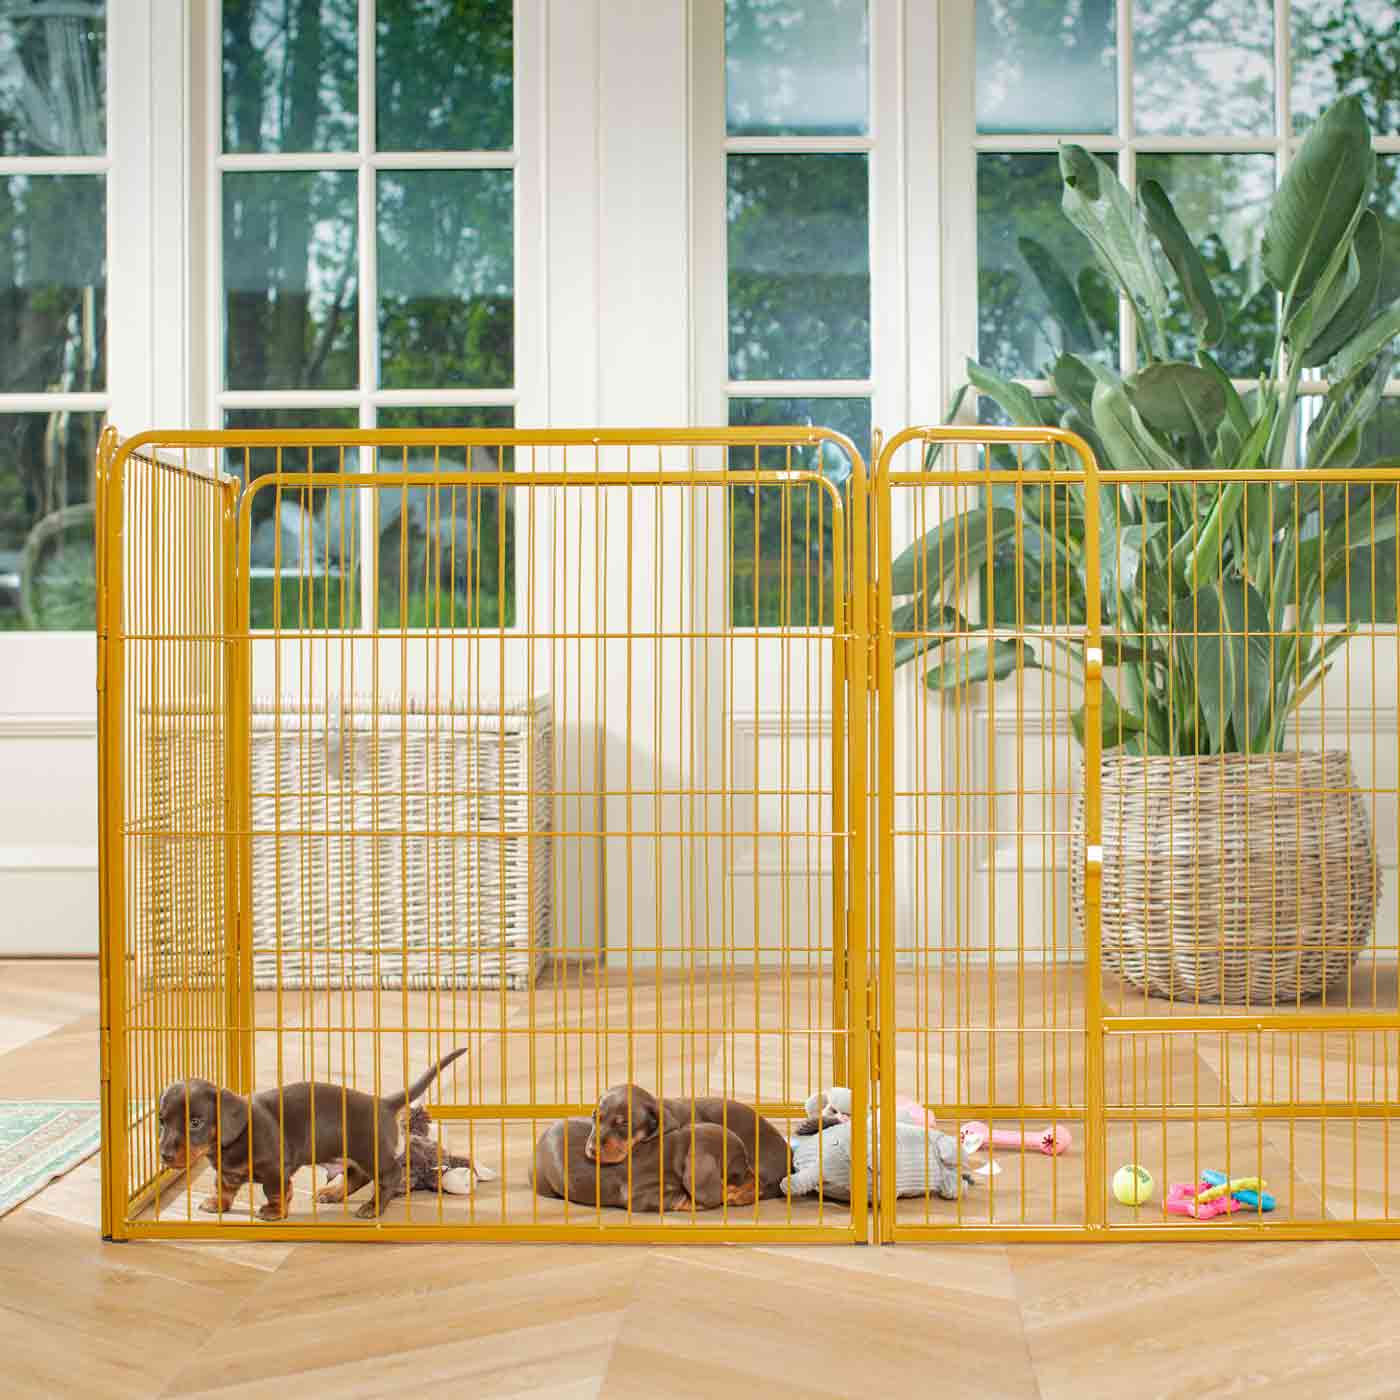 Ensure The Ultimate Puppy Safety with Our Heavy Duty 80cm High Gold Metal Play Pen, Crafted to Take Your Pet Right Through Maturity! Powder Coated to Be Extra Hardwearing! 6 panels that are 80cm high and attachments to connect to any cage. The modular system allows you to change the puppy pen shape with multiple layouts! Available To Now at Lords & Labradors US